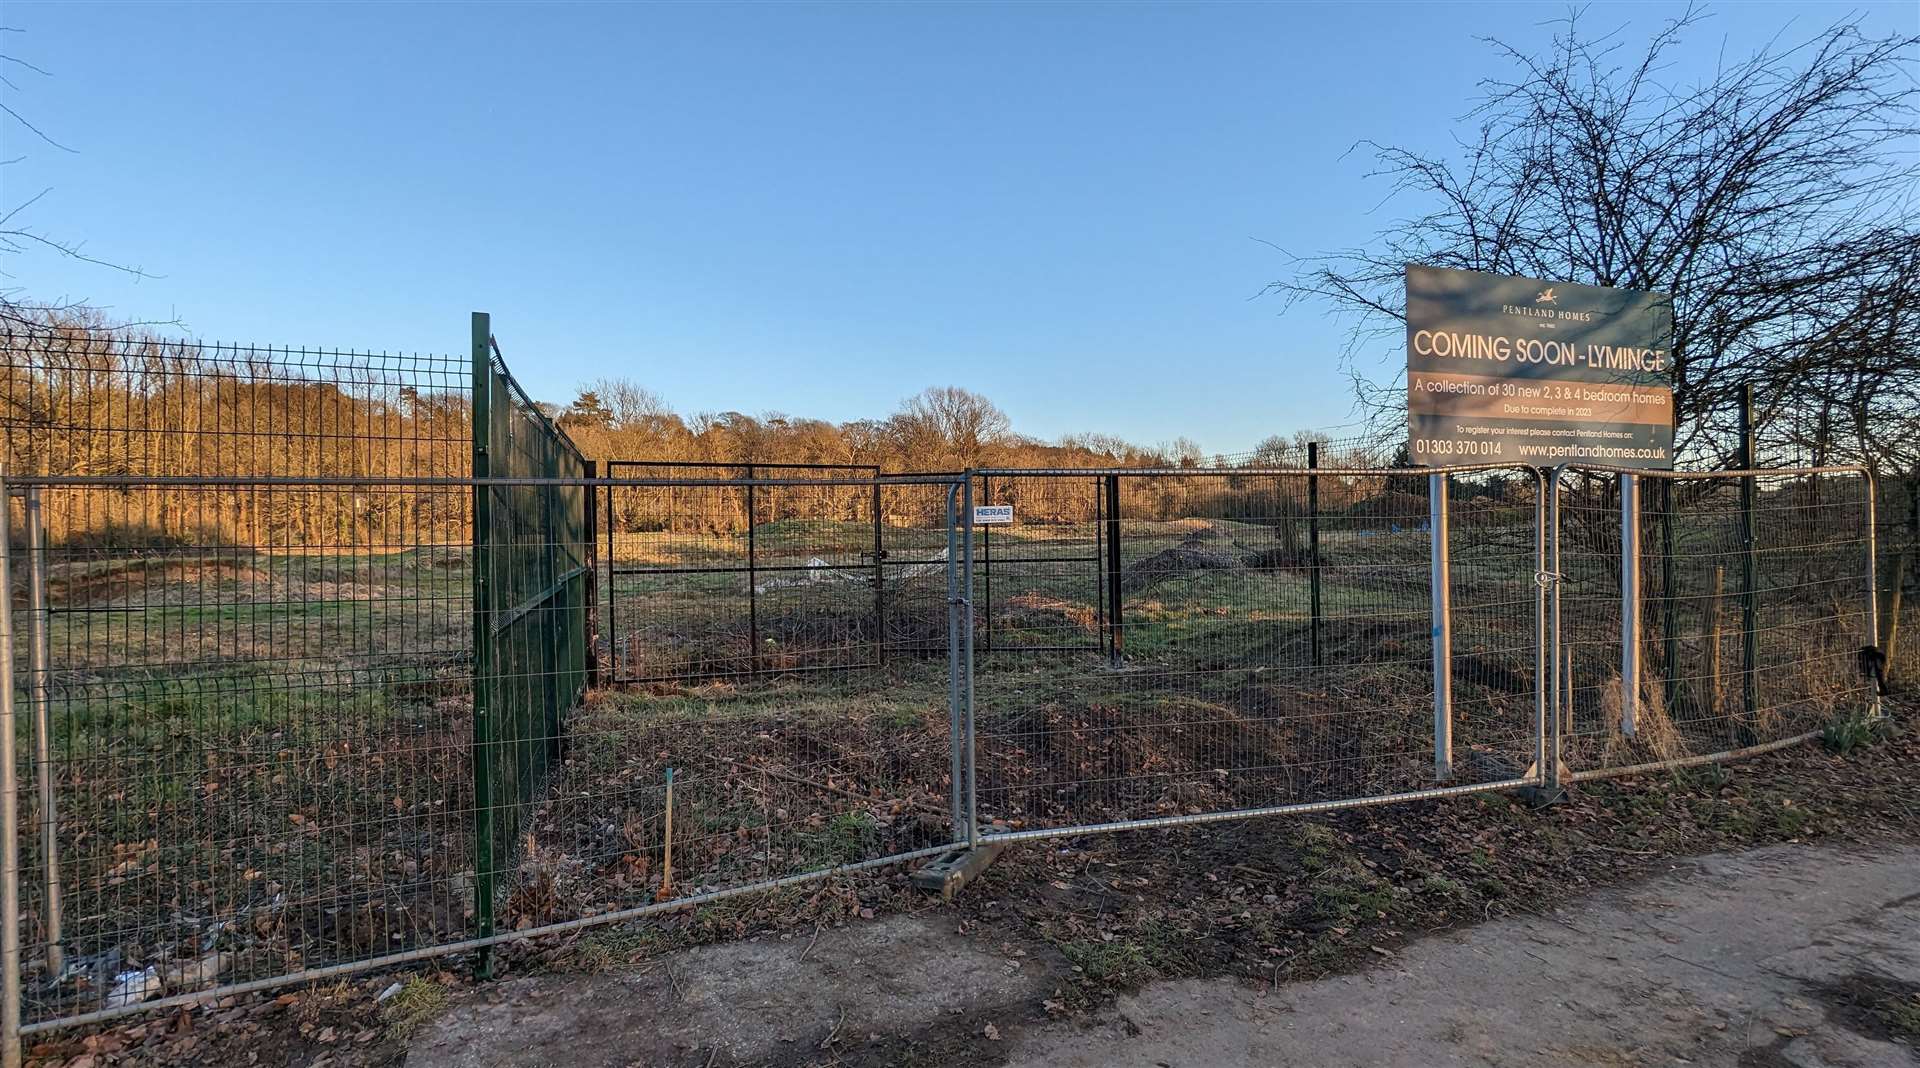 The site of proposed homes in Lyminge off the main road south of the village